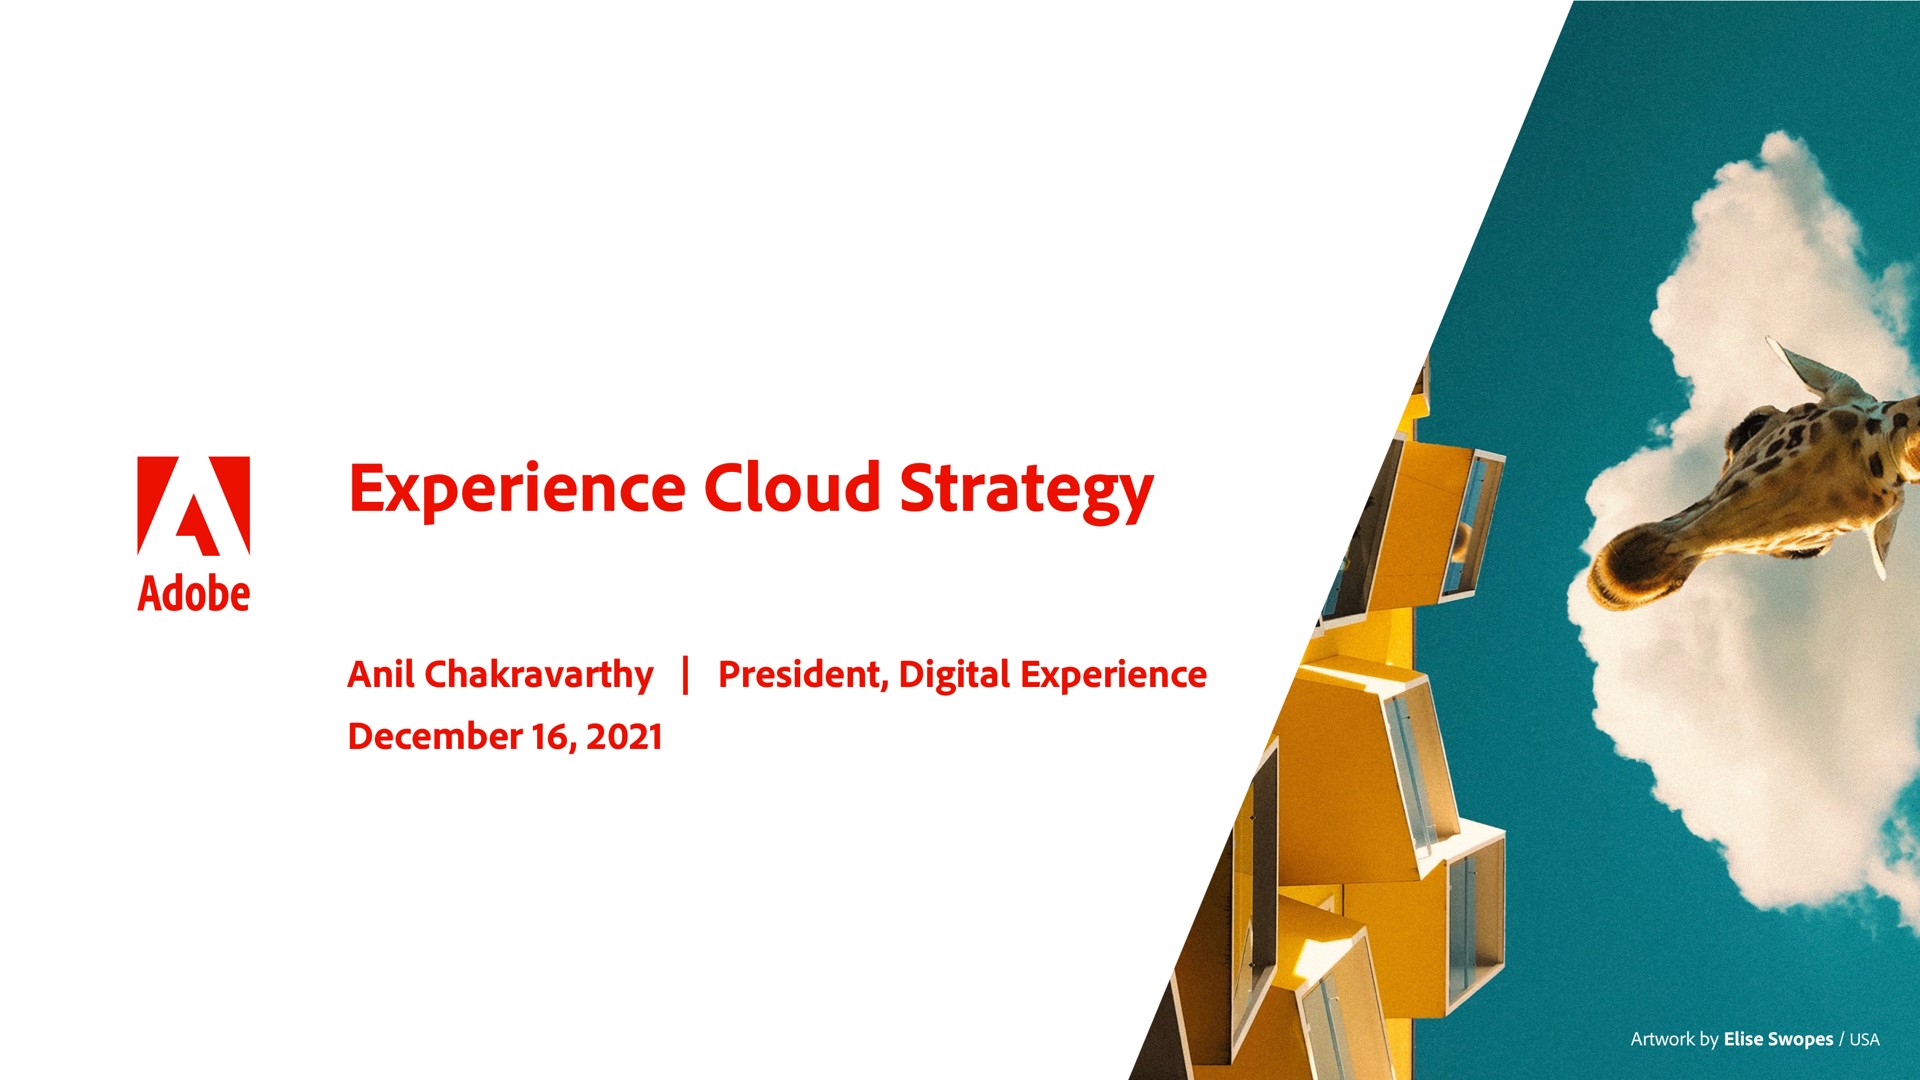 experience cloud strategy | Adobe